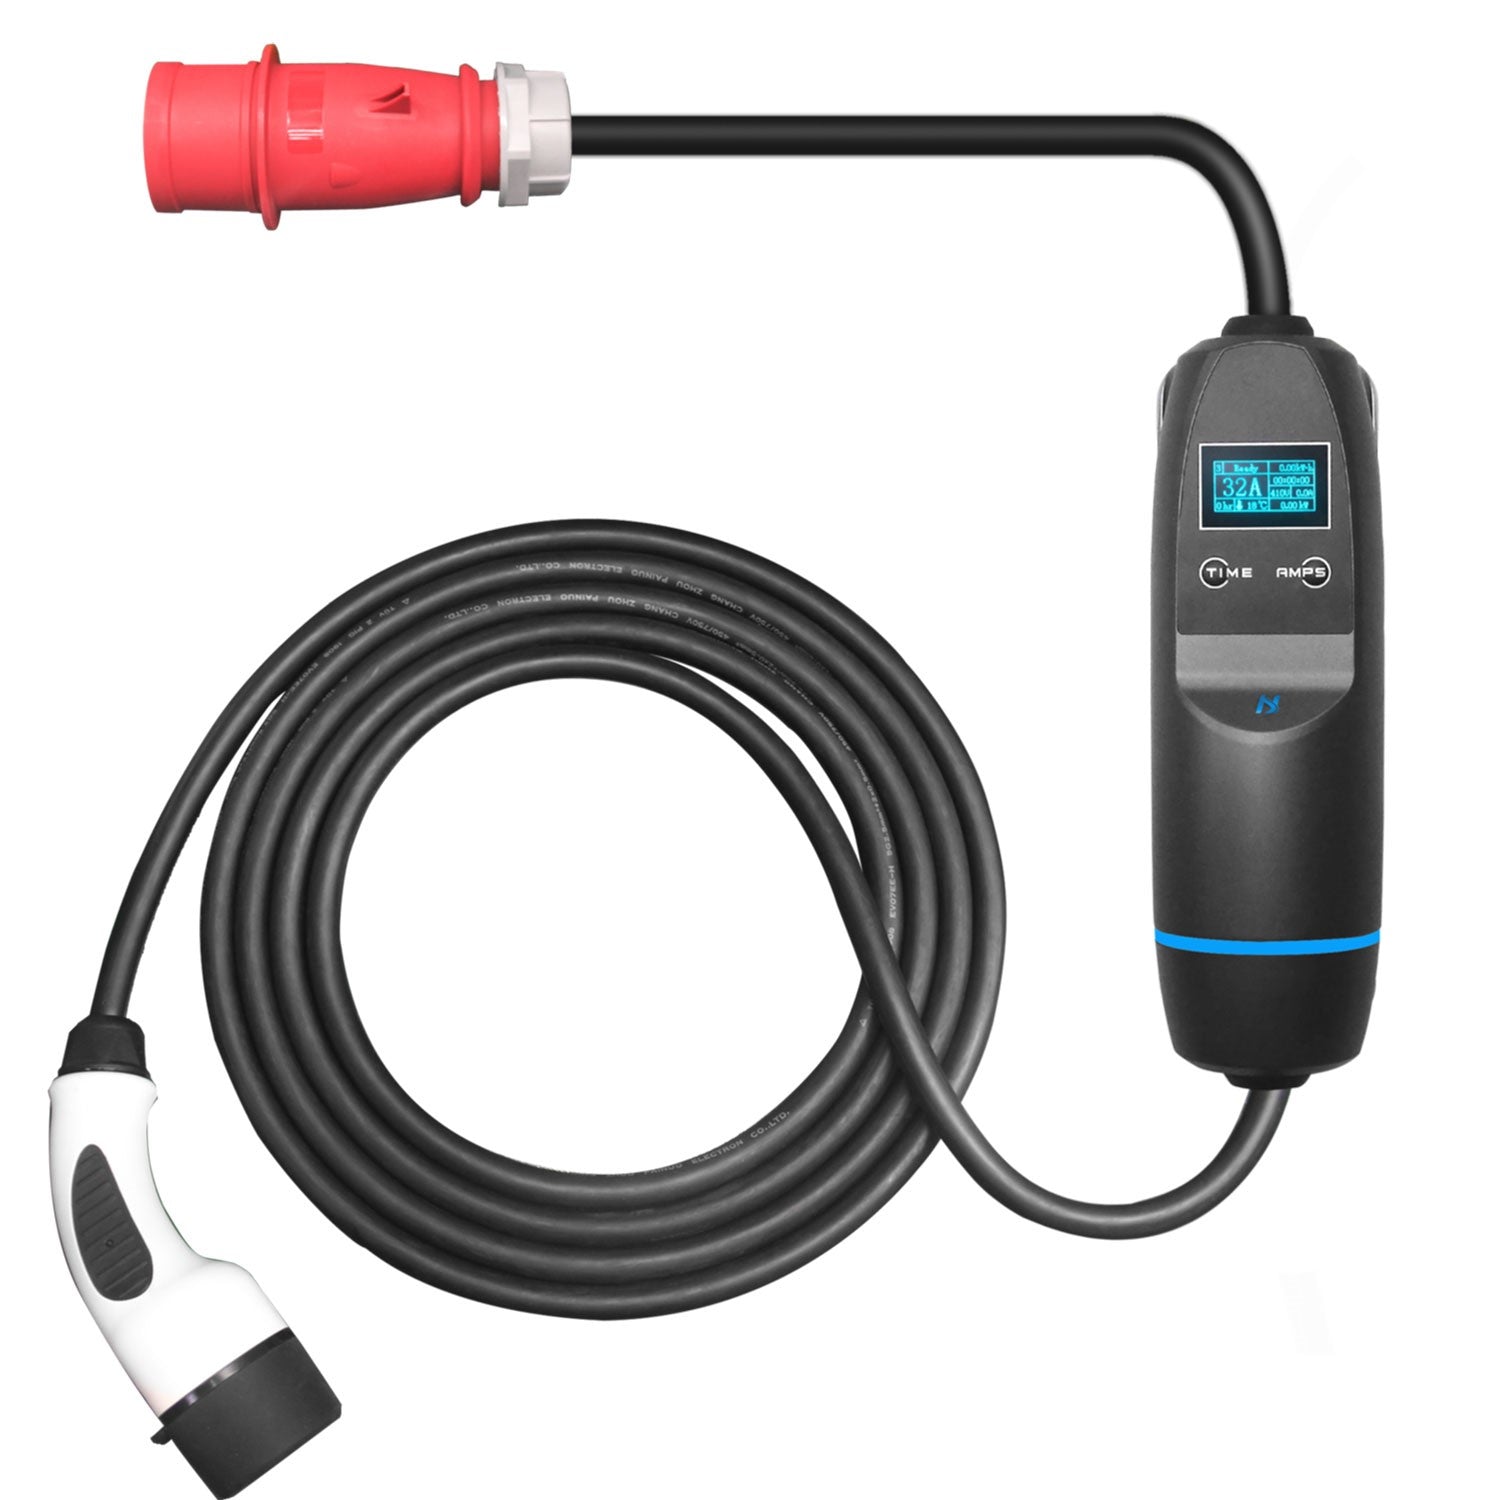 Voltacon Sparky Electric Vehicle Charger 22kW 3-Phase UK Market Type 2